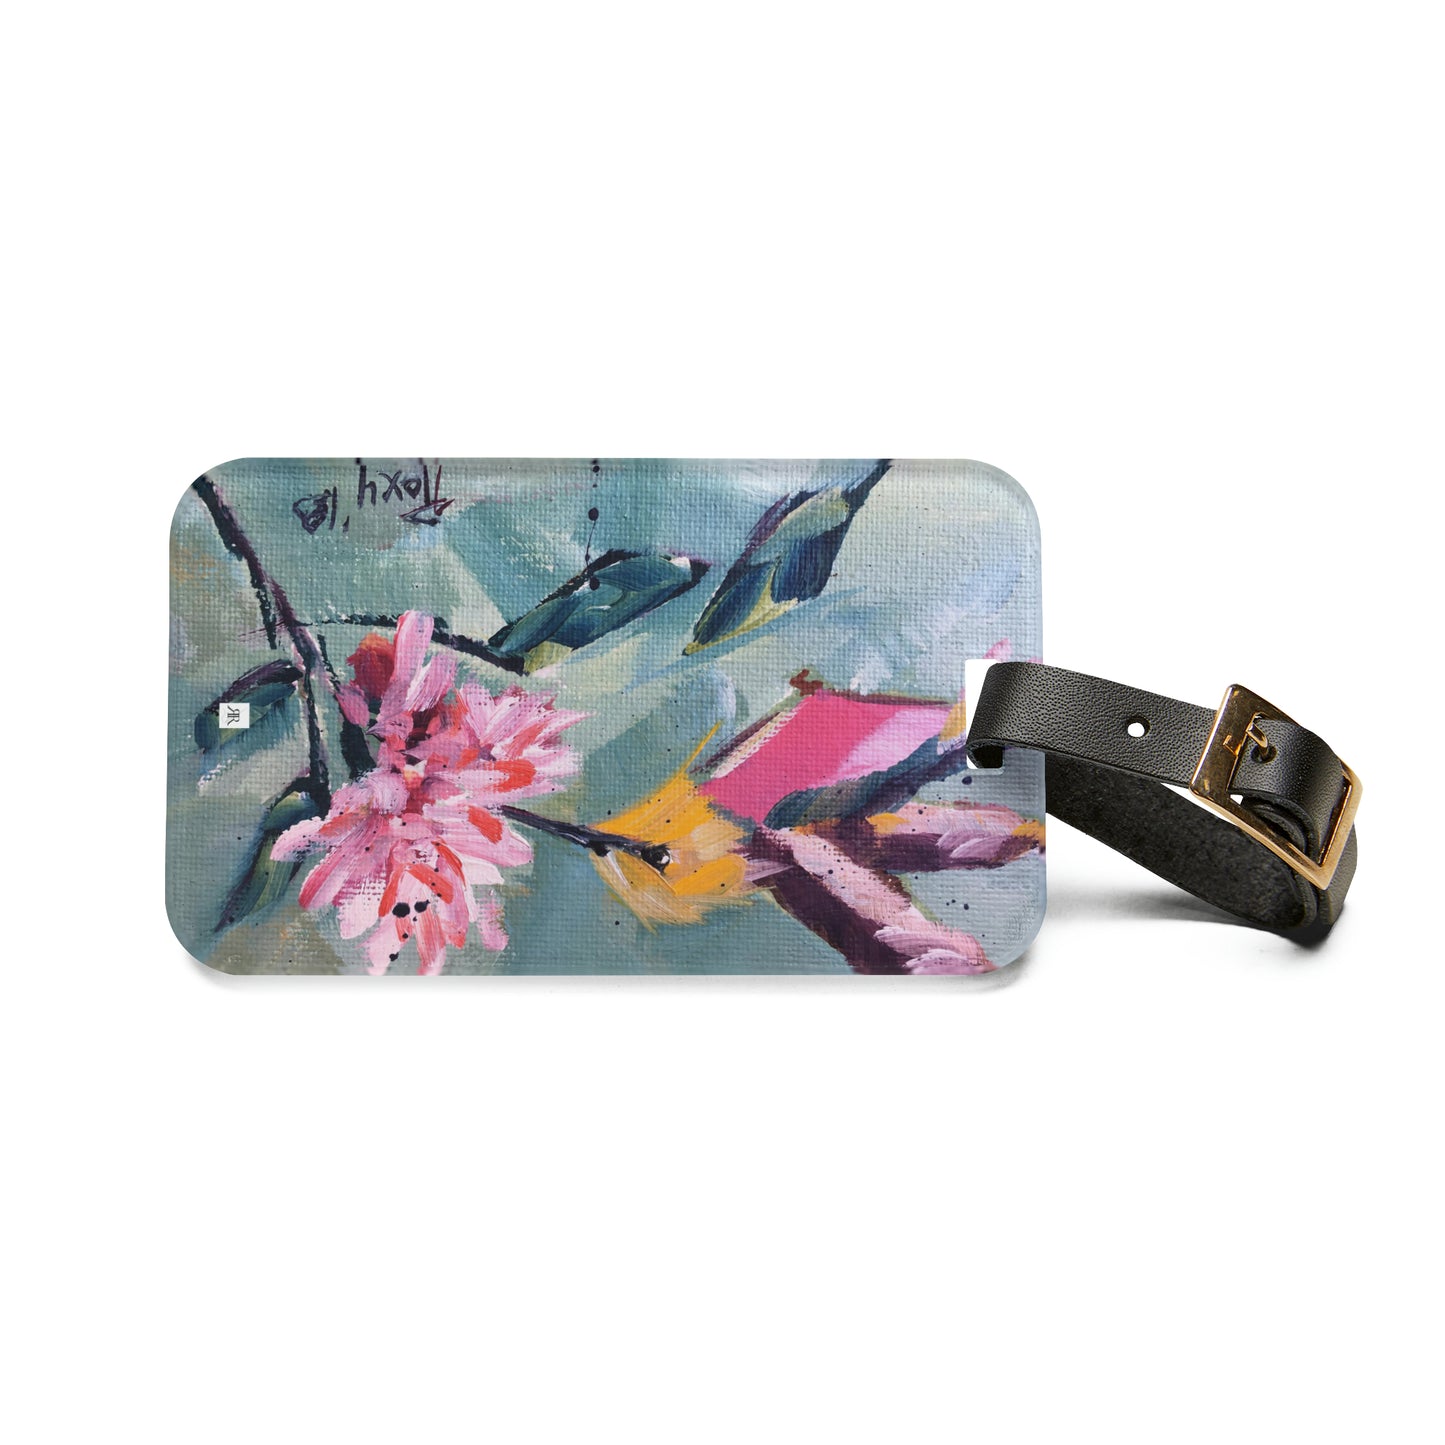 Pink Hummingbird with Pink Flower Luggage Tag